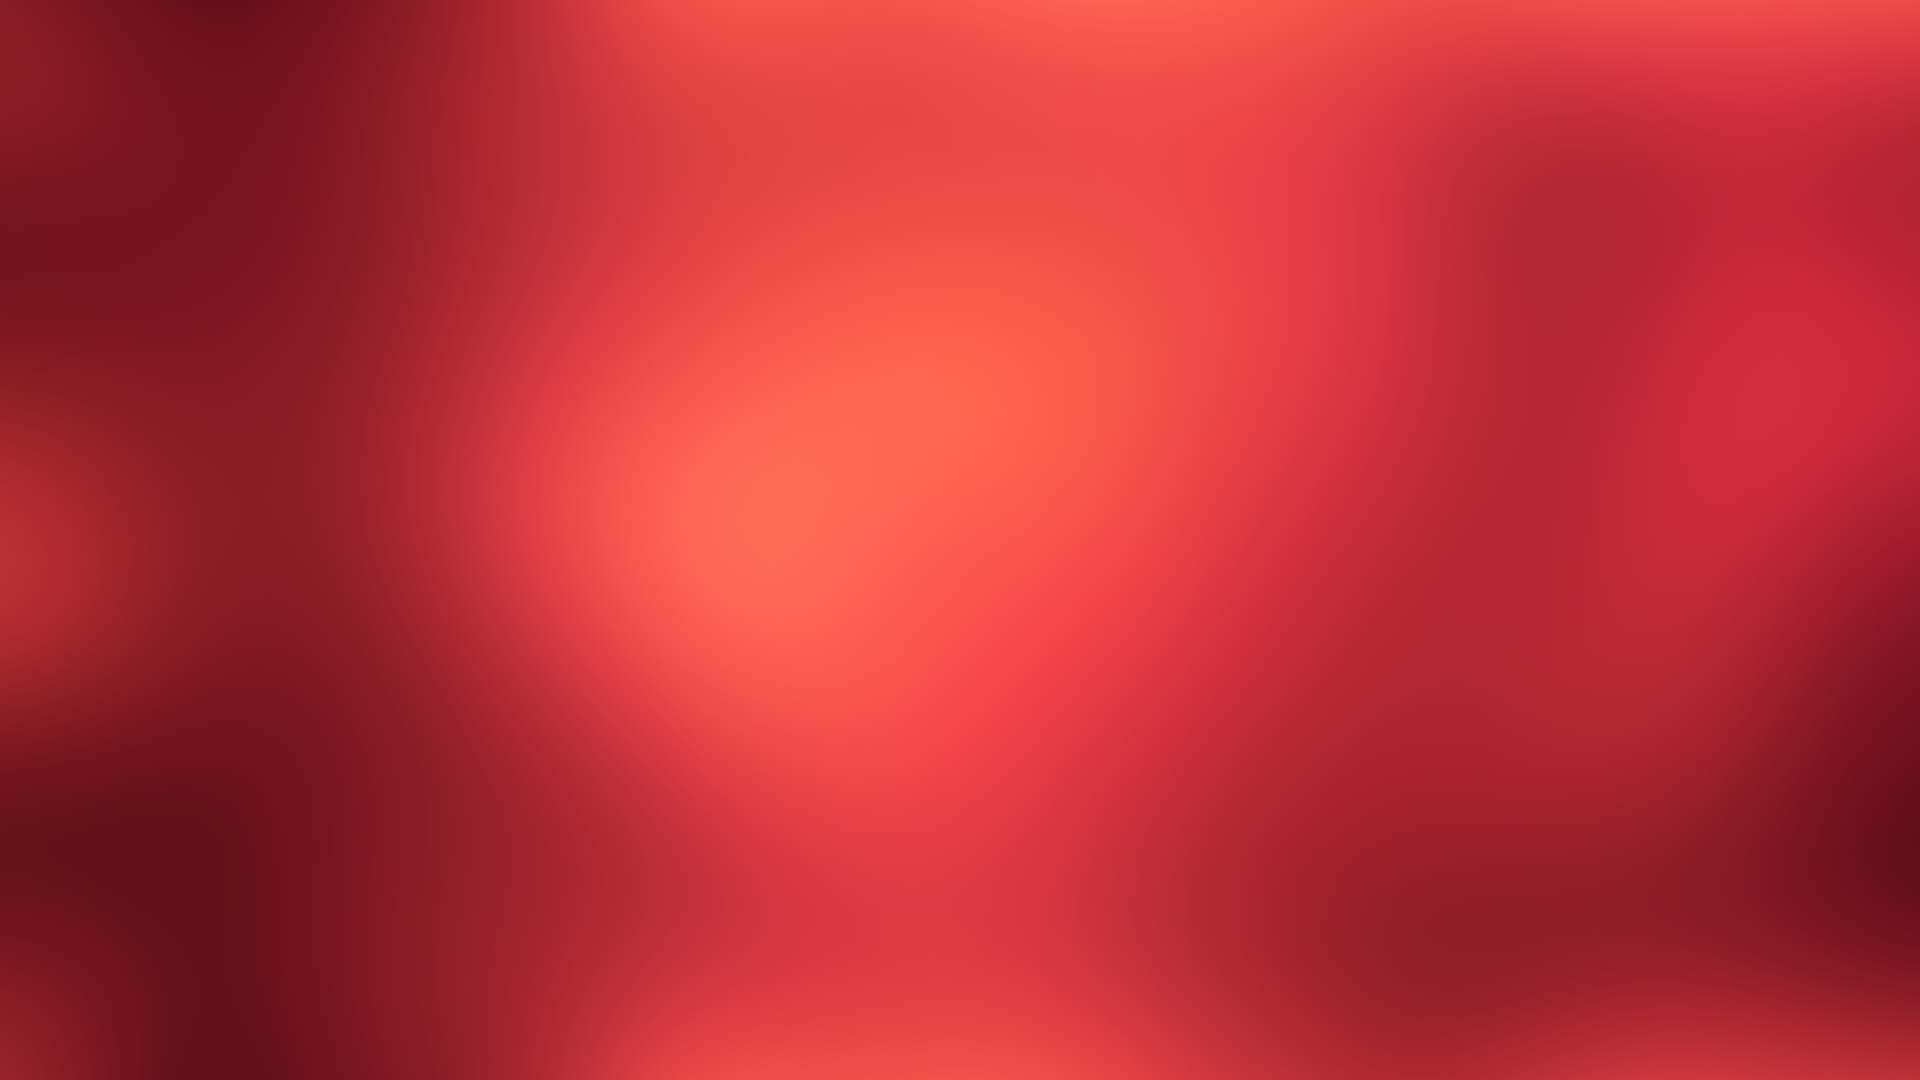 Wallpaper Solid Red Bright Shiny Full HD 1080p